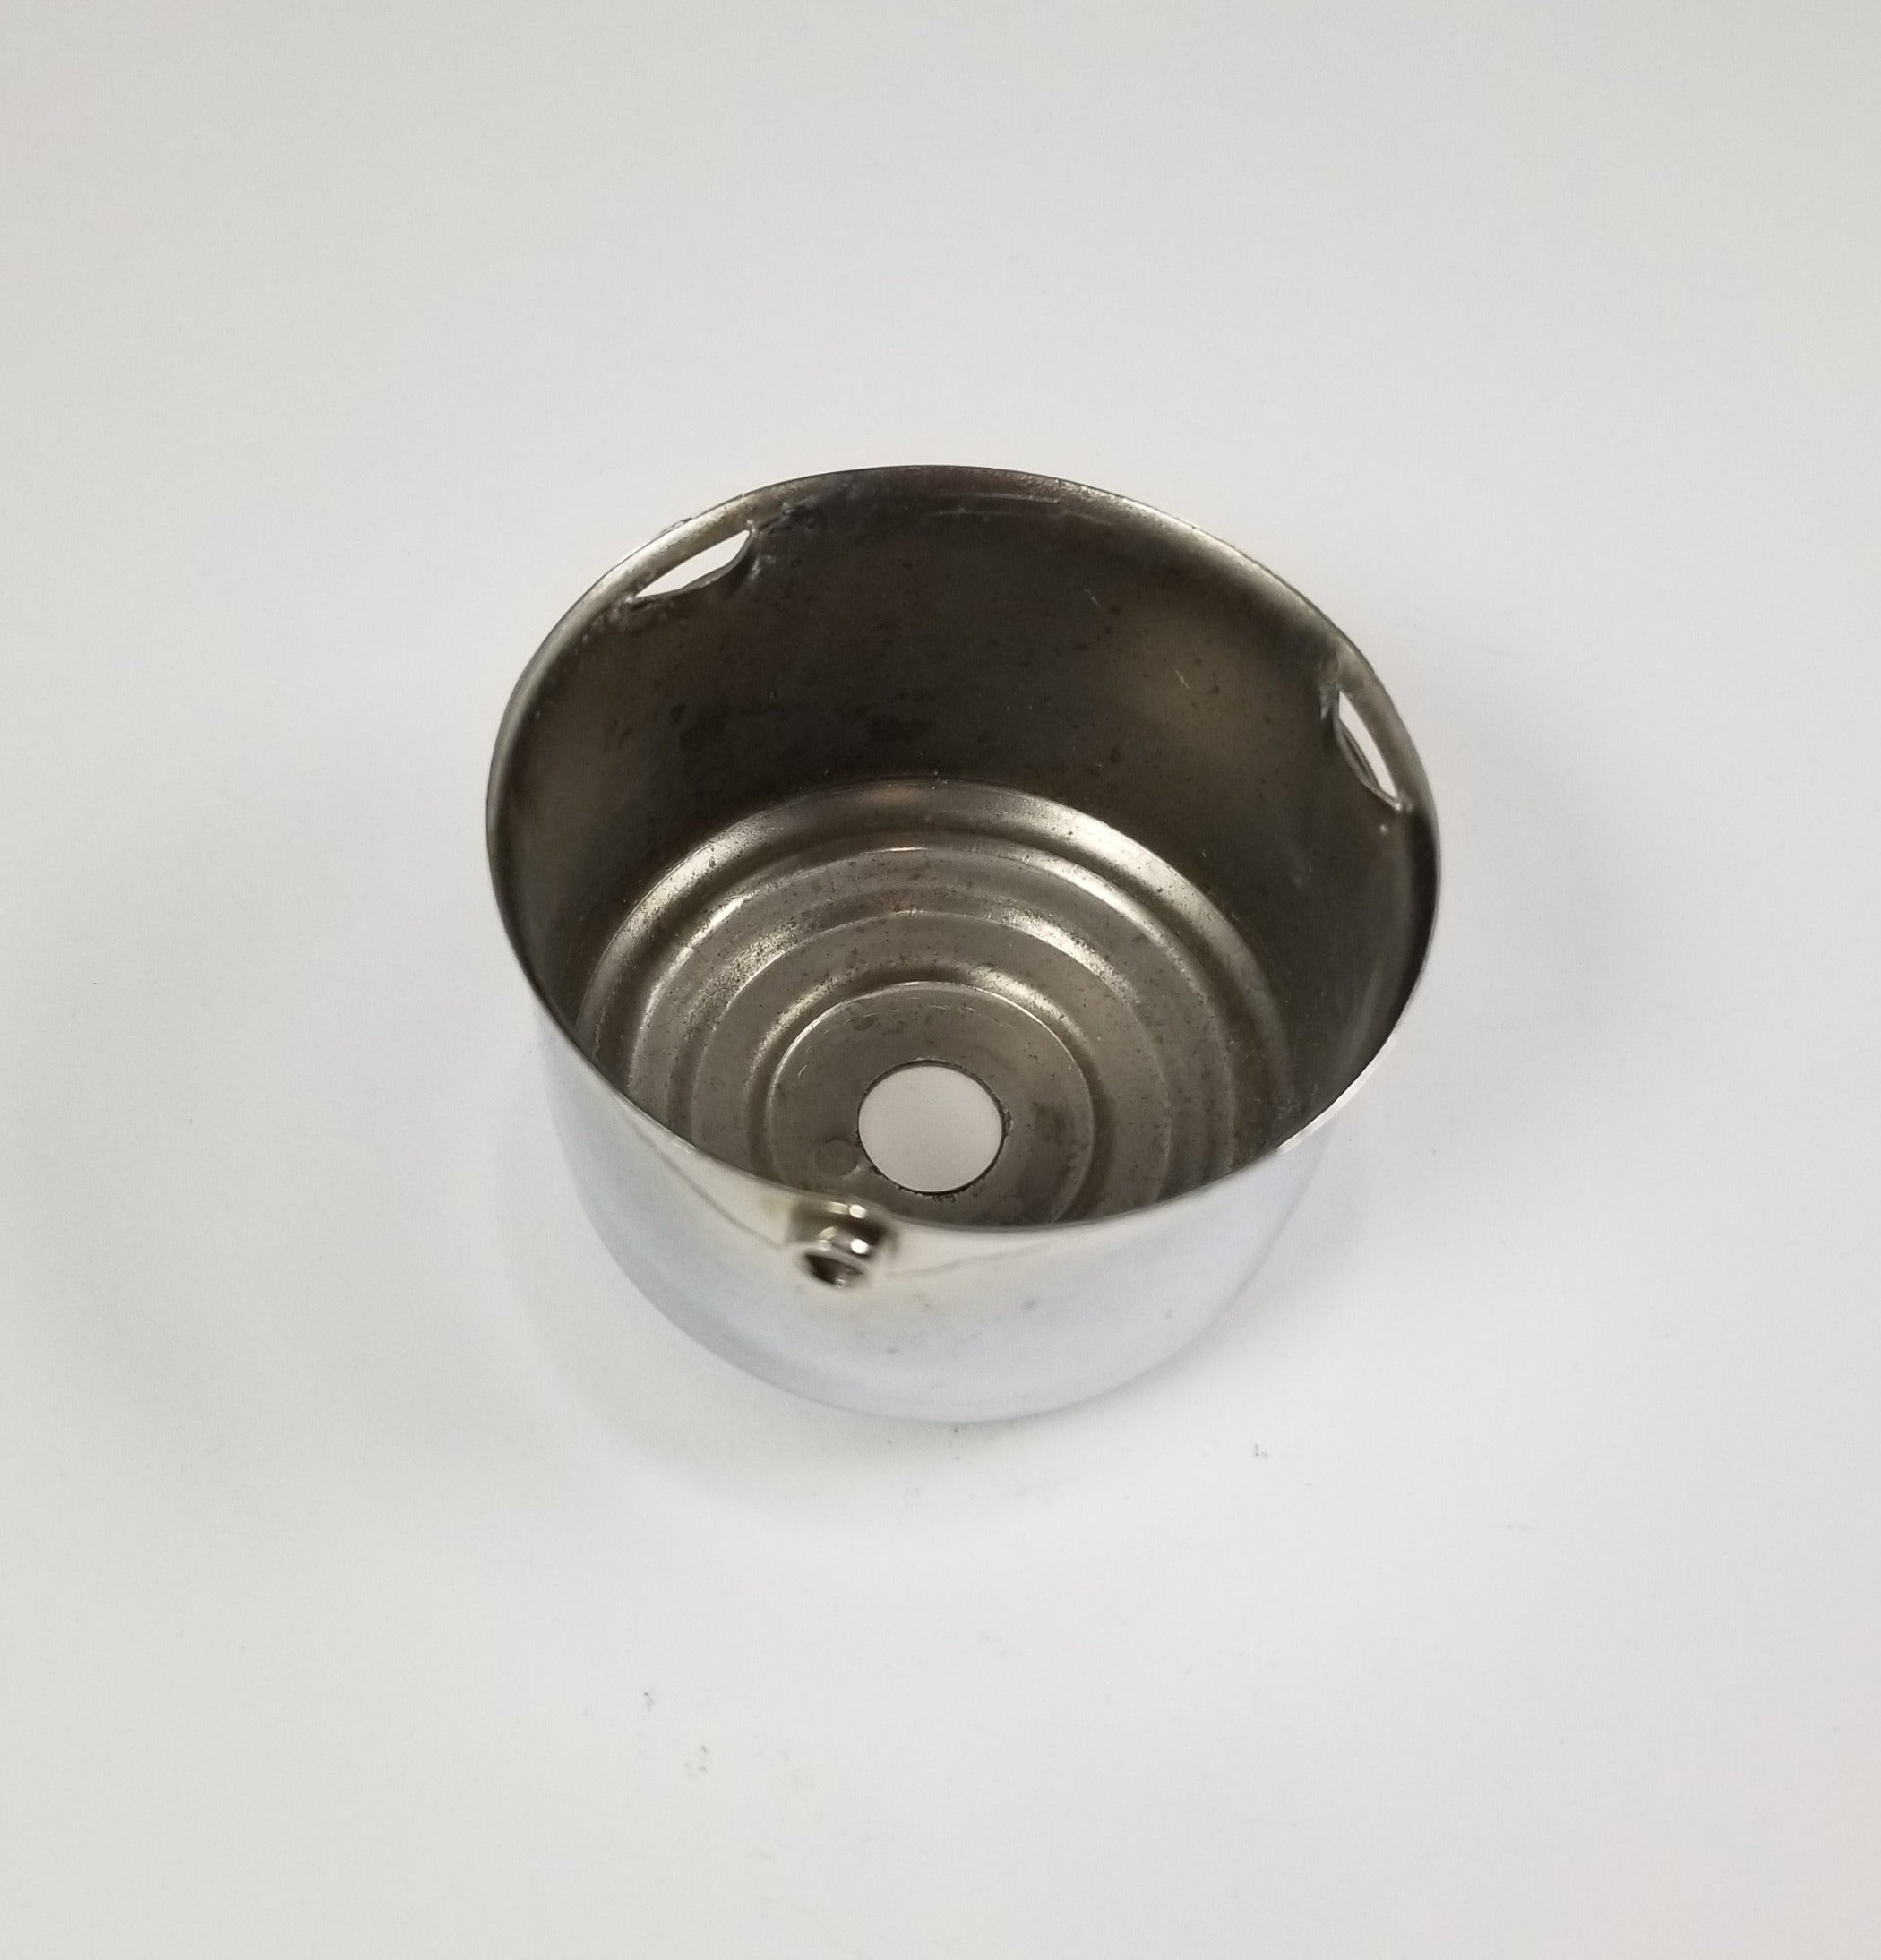 Solid Brass - Chrome Plated - Holder for 2-1/4" Fitter